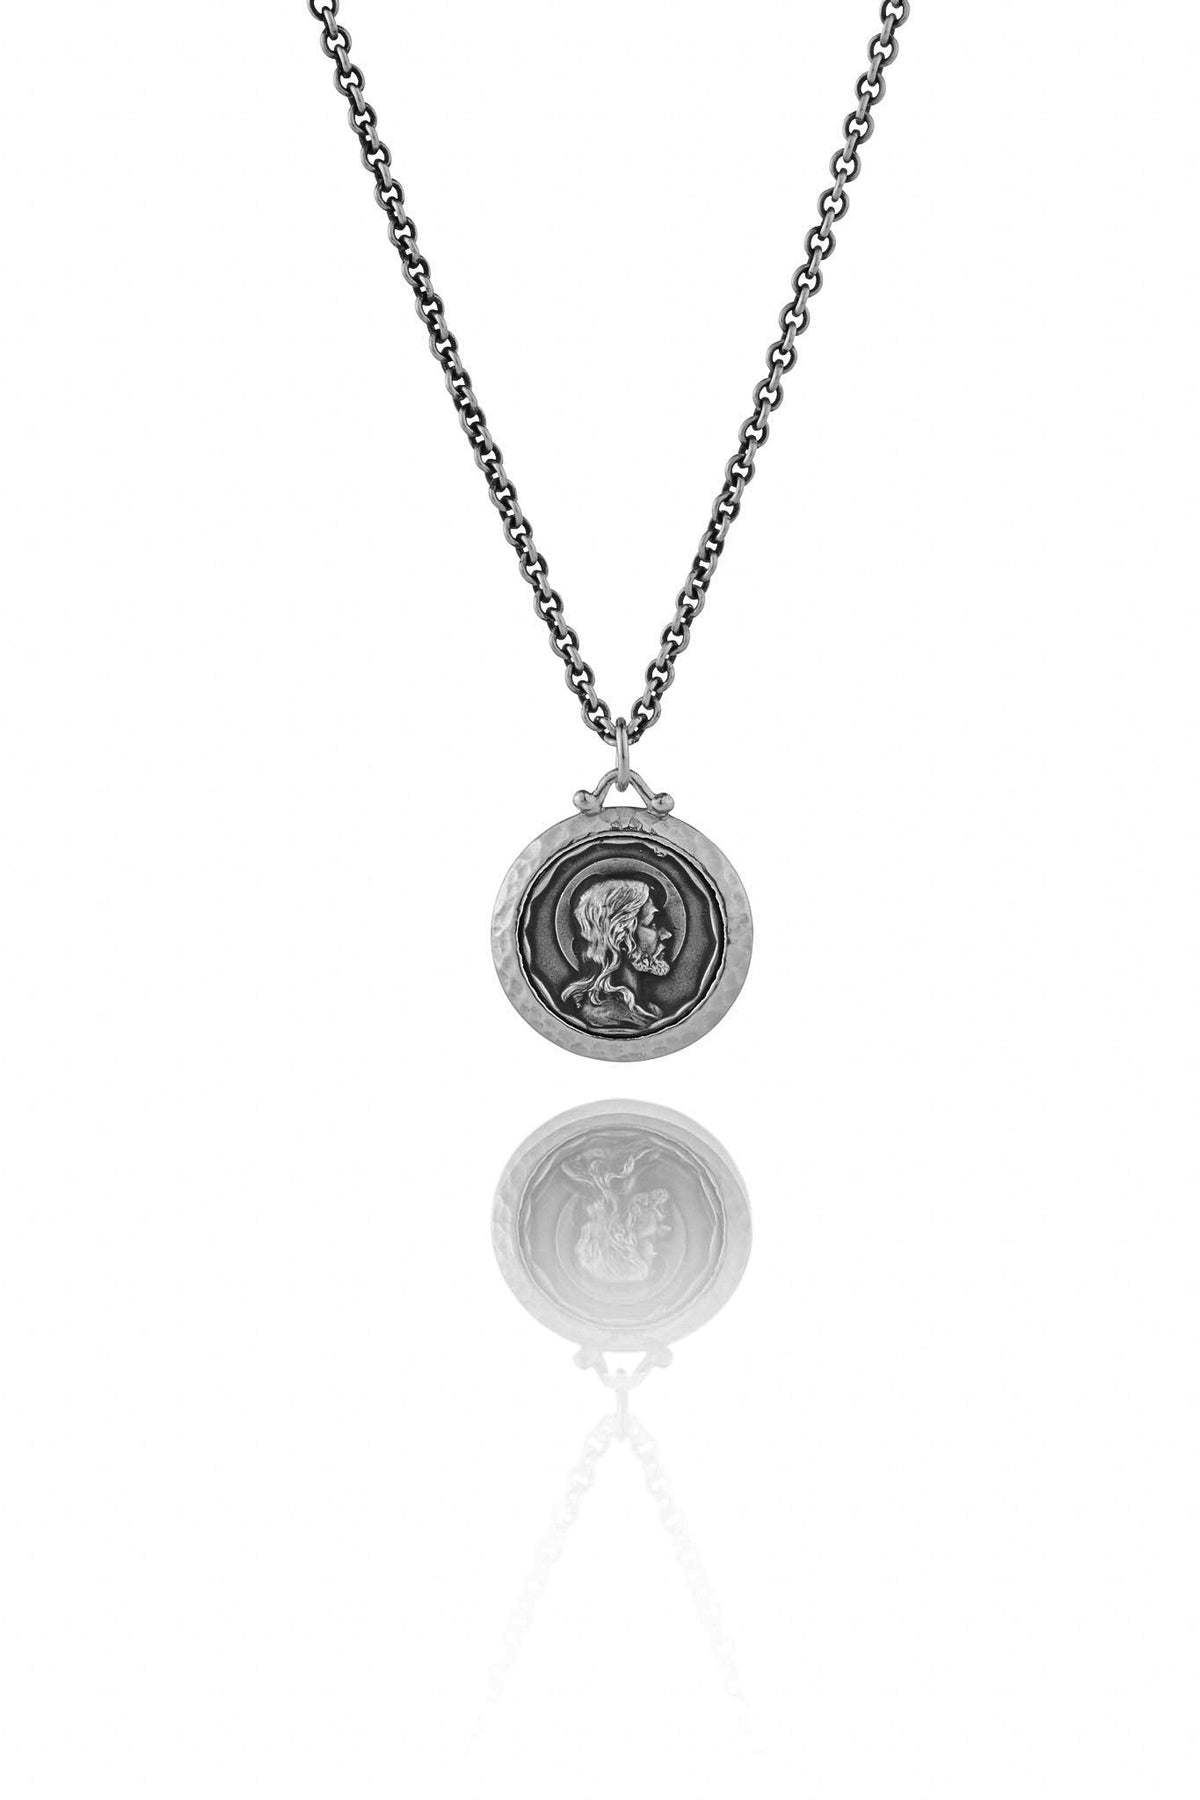 Holy Face of Jesus Necklace | Religious Jewelry | Lifetime Guarantee ...